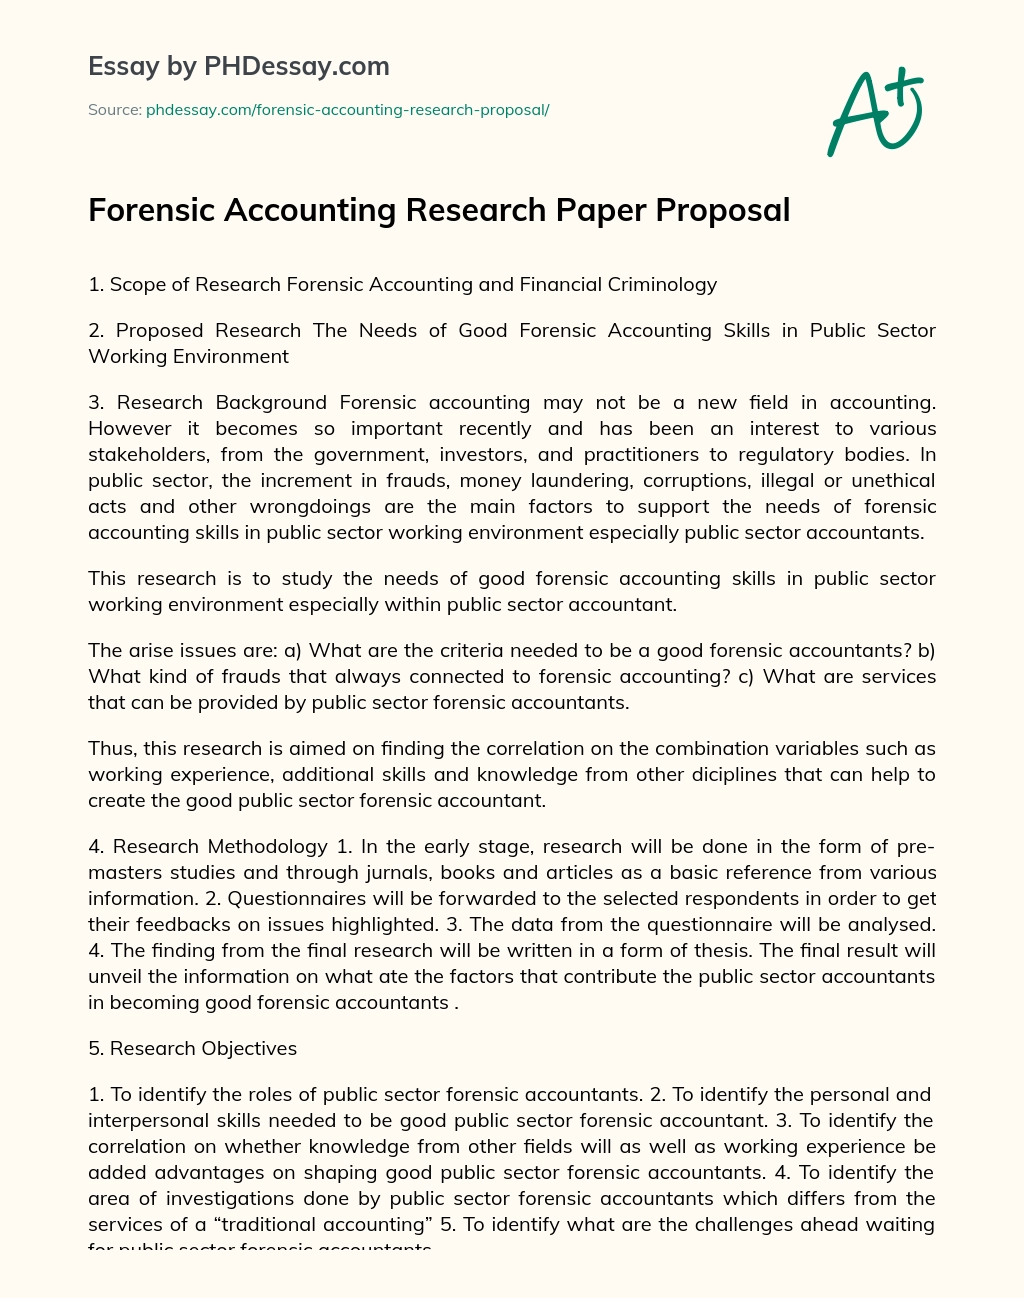 Forensic Accounting Research Paper Proposal essay